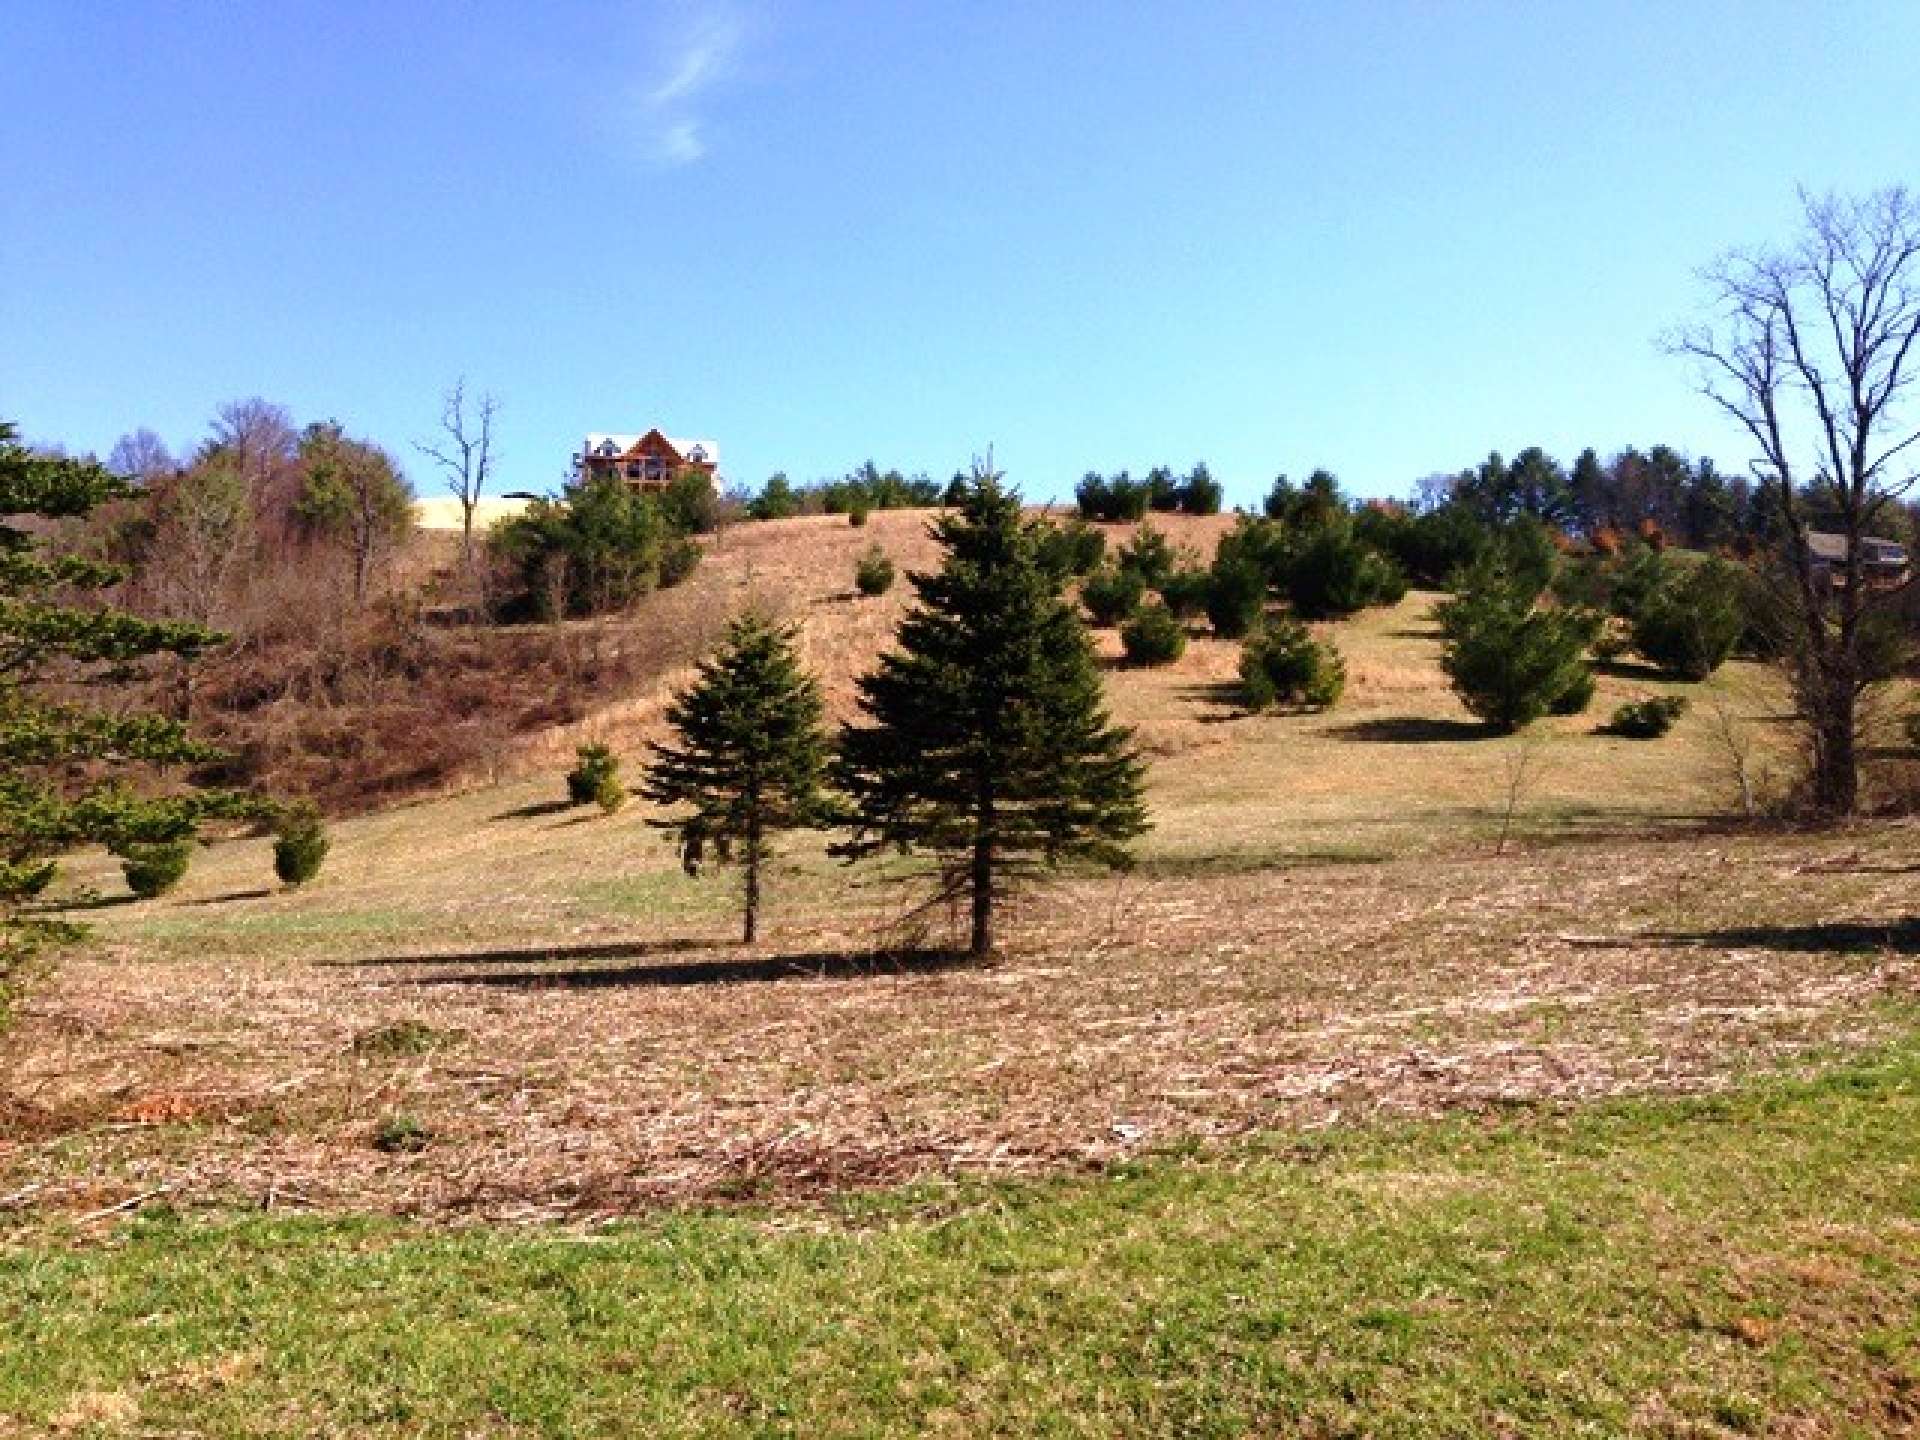 Lot 30 is available and offers a beautiful homesite with views of the river and common area.